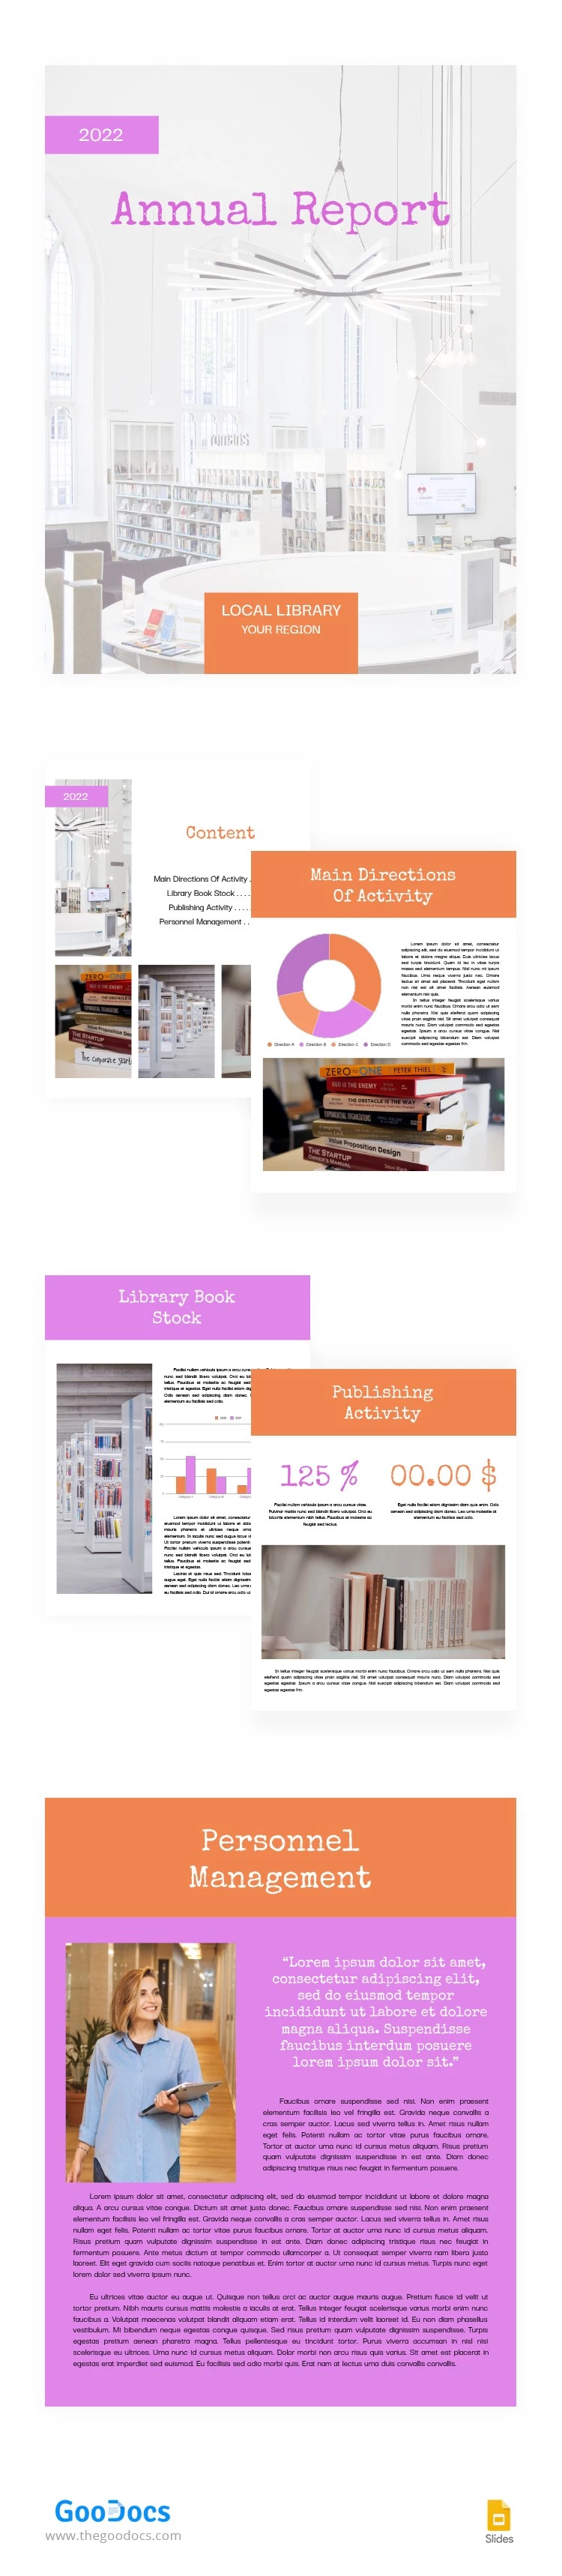 Local Library Annual Report - free Google Docs Template - 10062995